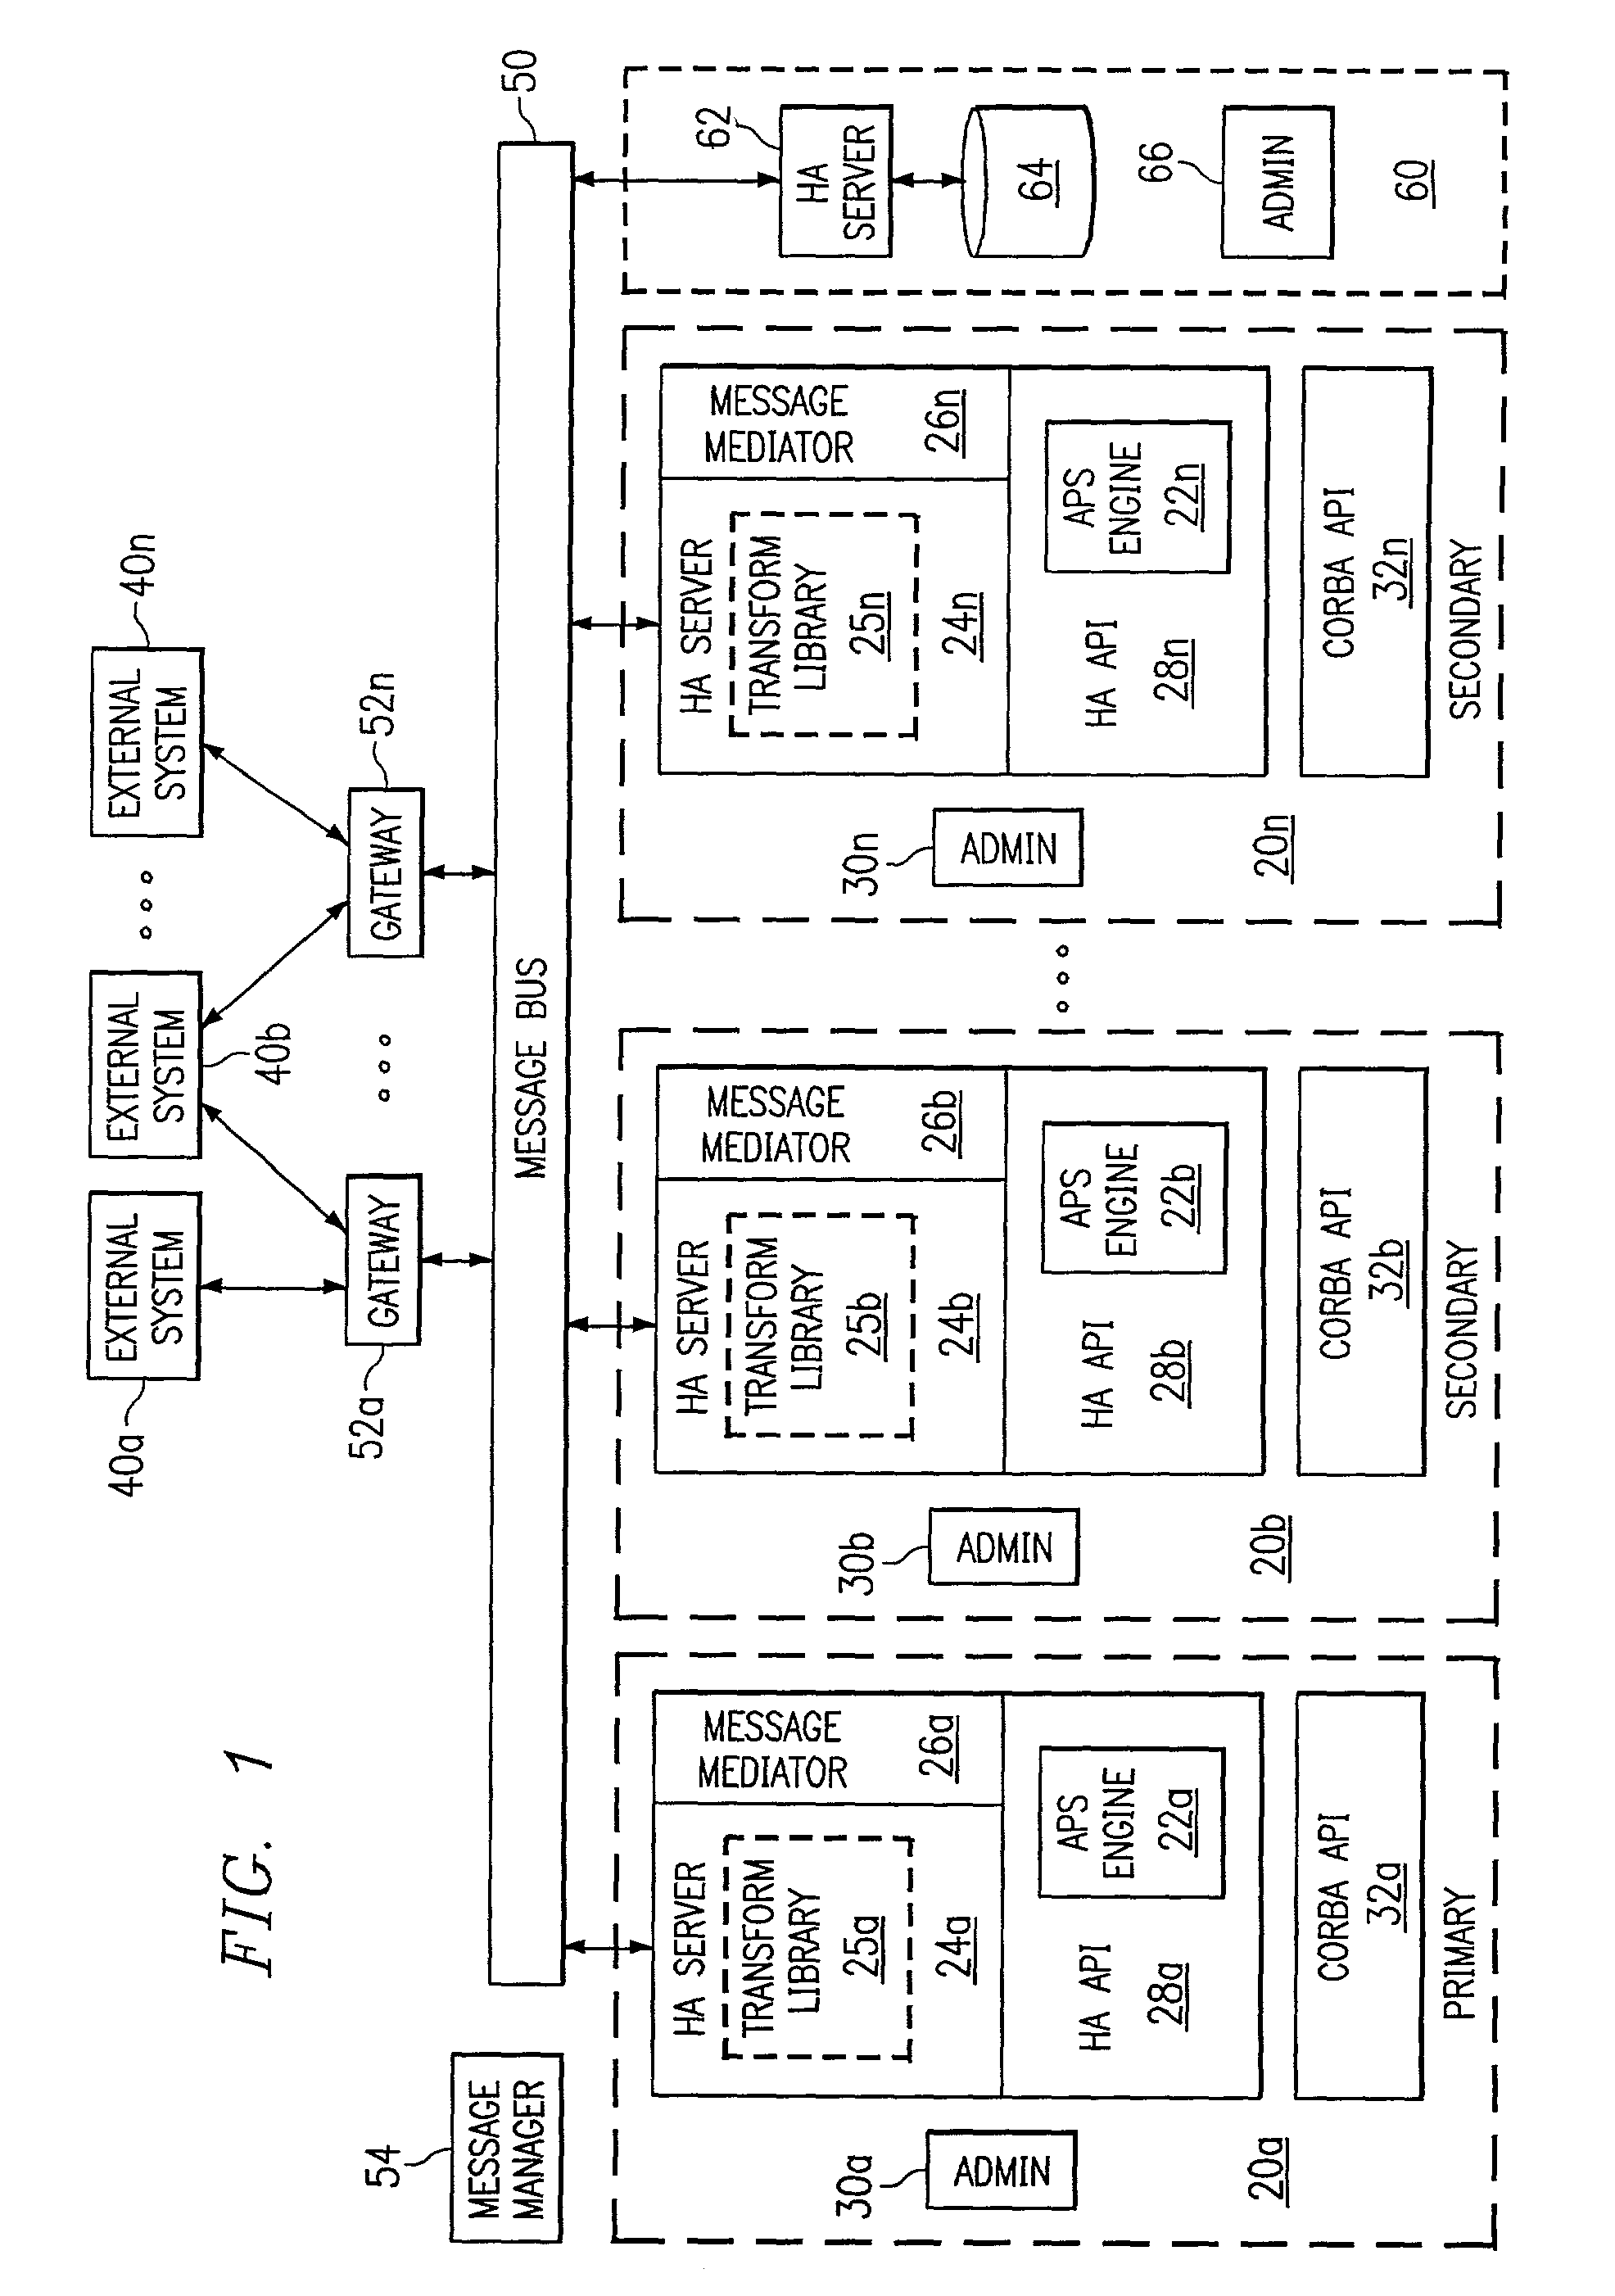 Synchronization of planning information in a high availability planning and scheduling architecture